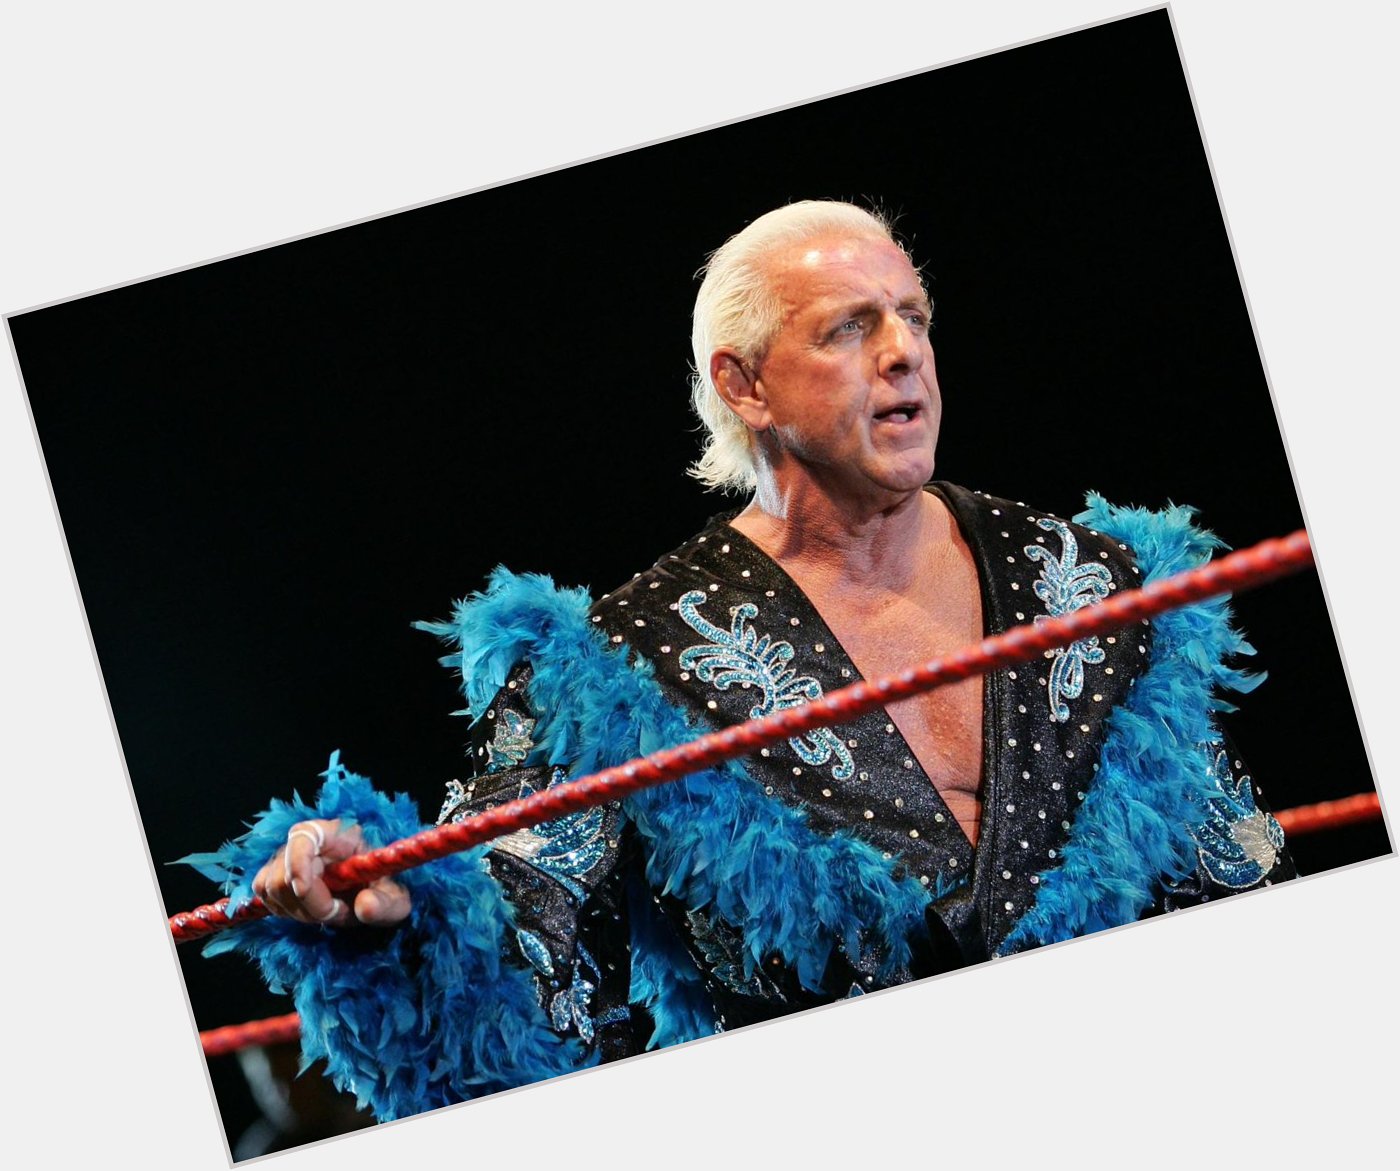 Happy birthday to the Nature Boy Ric Flair who turns 65 today! 